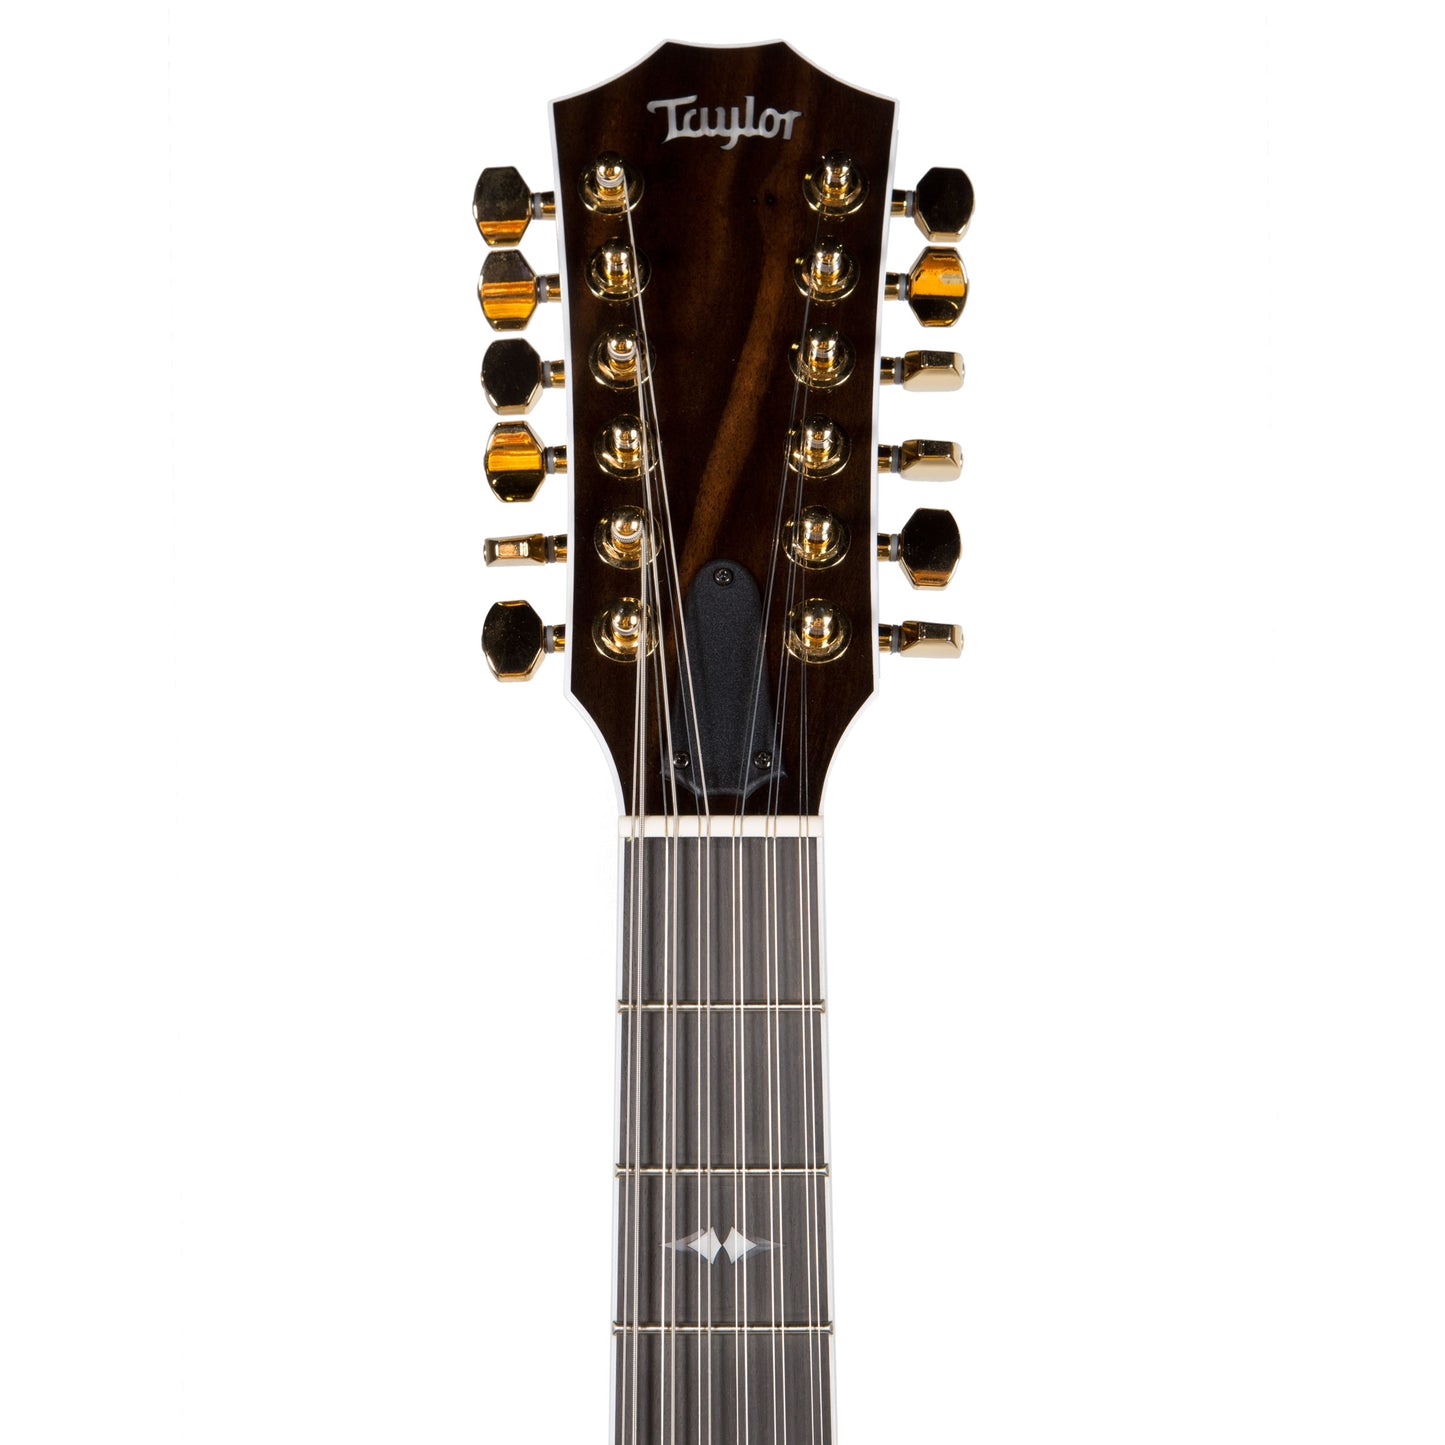 Taylor T5Z-12 Custom 12-String Thinline Acoustic Electric Guitar with Case (T5Z12CUSTOMDEMO1105299150)